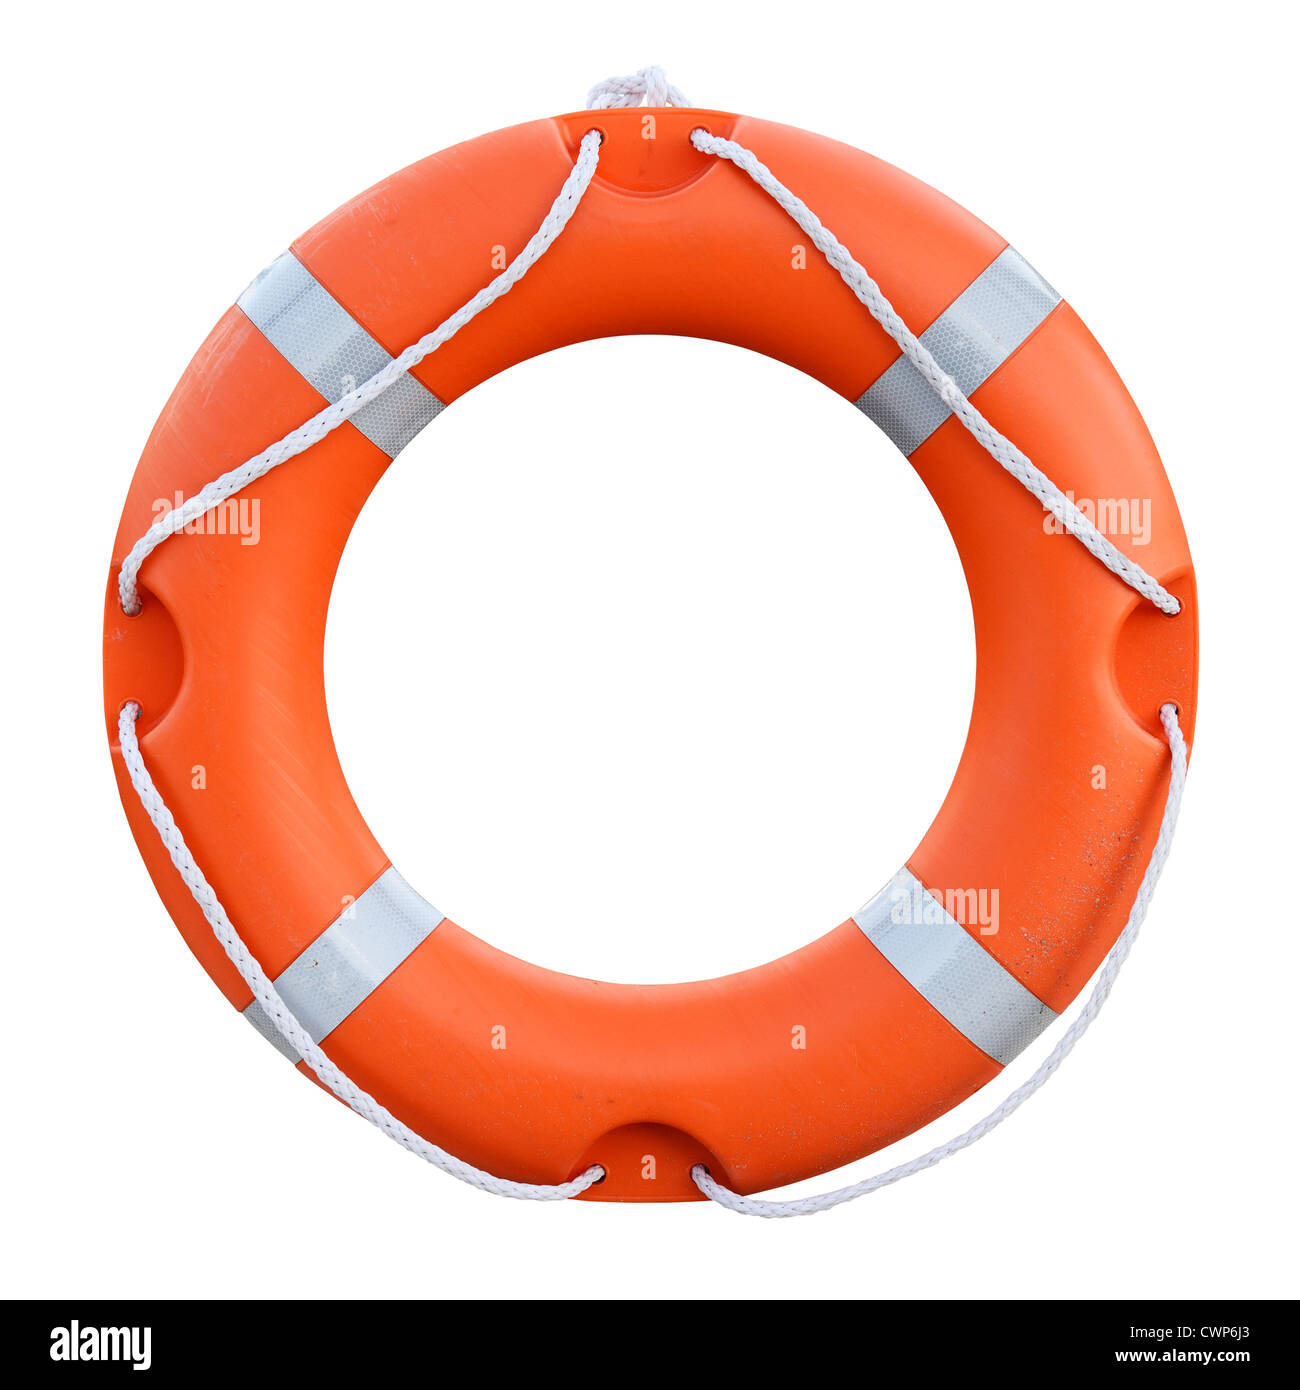 Safe guard life ring stock photo. Image of help, save - 19745338